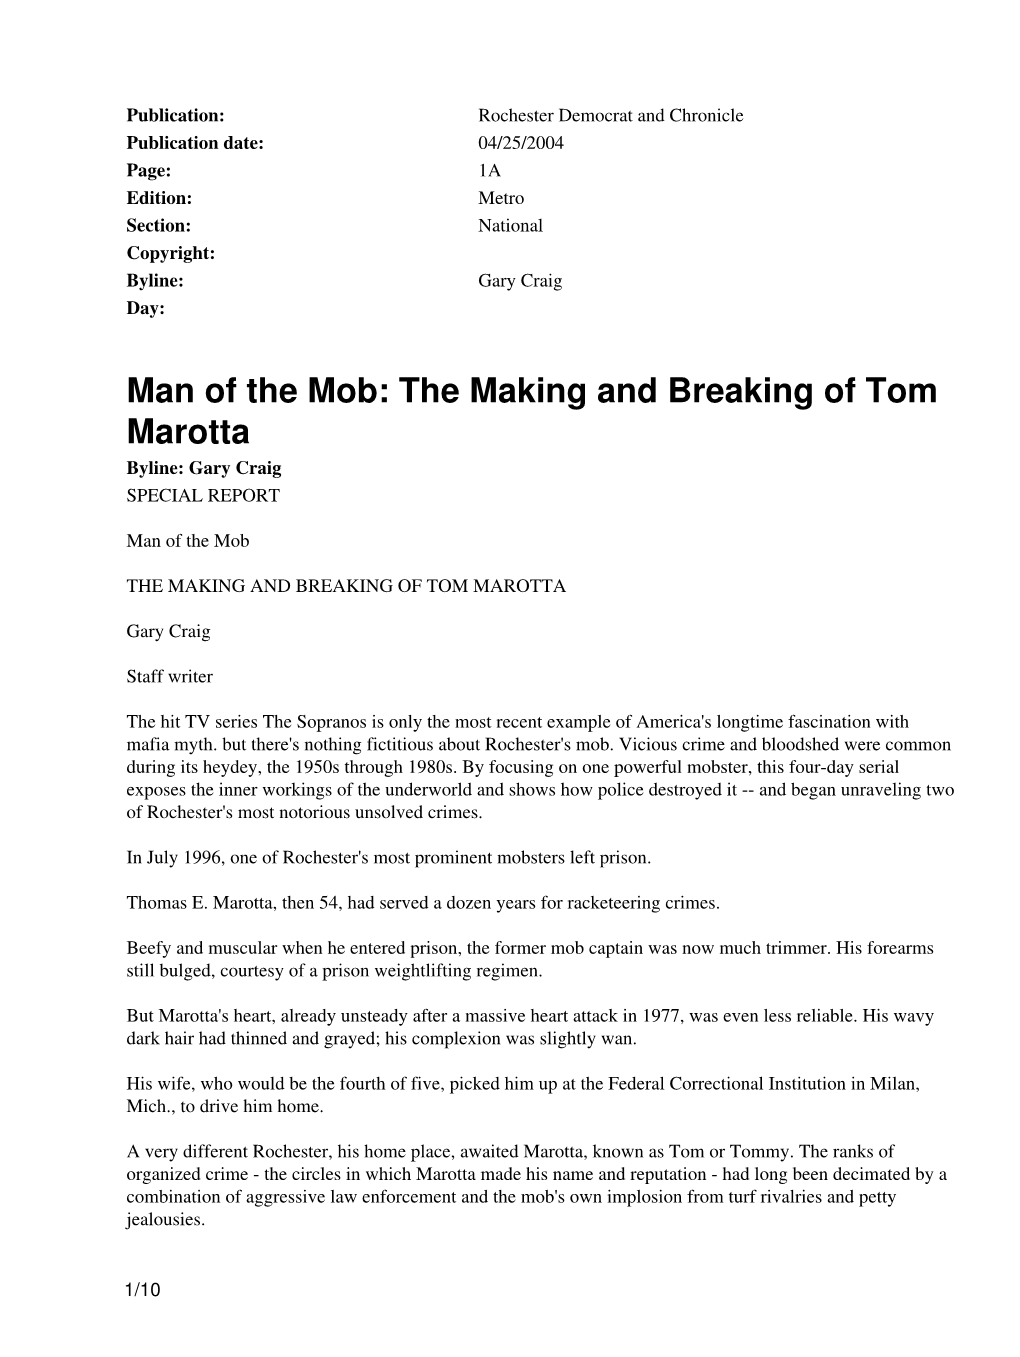 Man of the Mob: the Making and Breaking of Tom Marotta Byline: Gary Craig SPECIAL REPORT